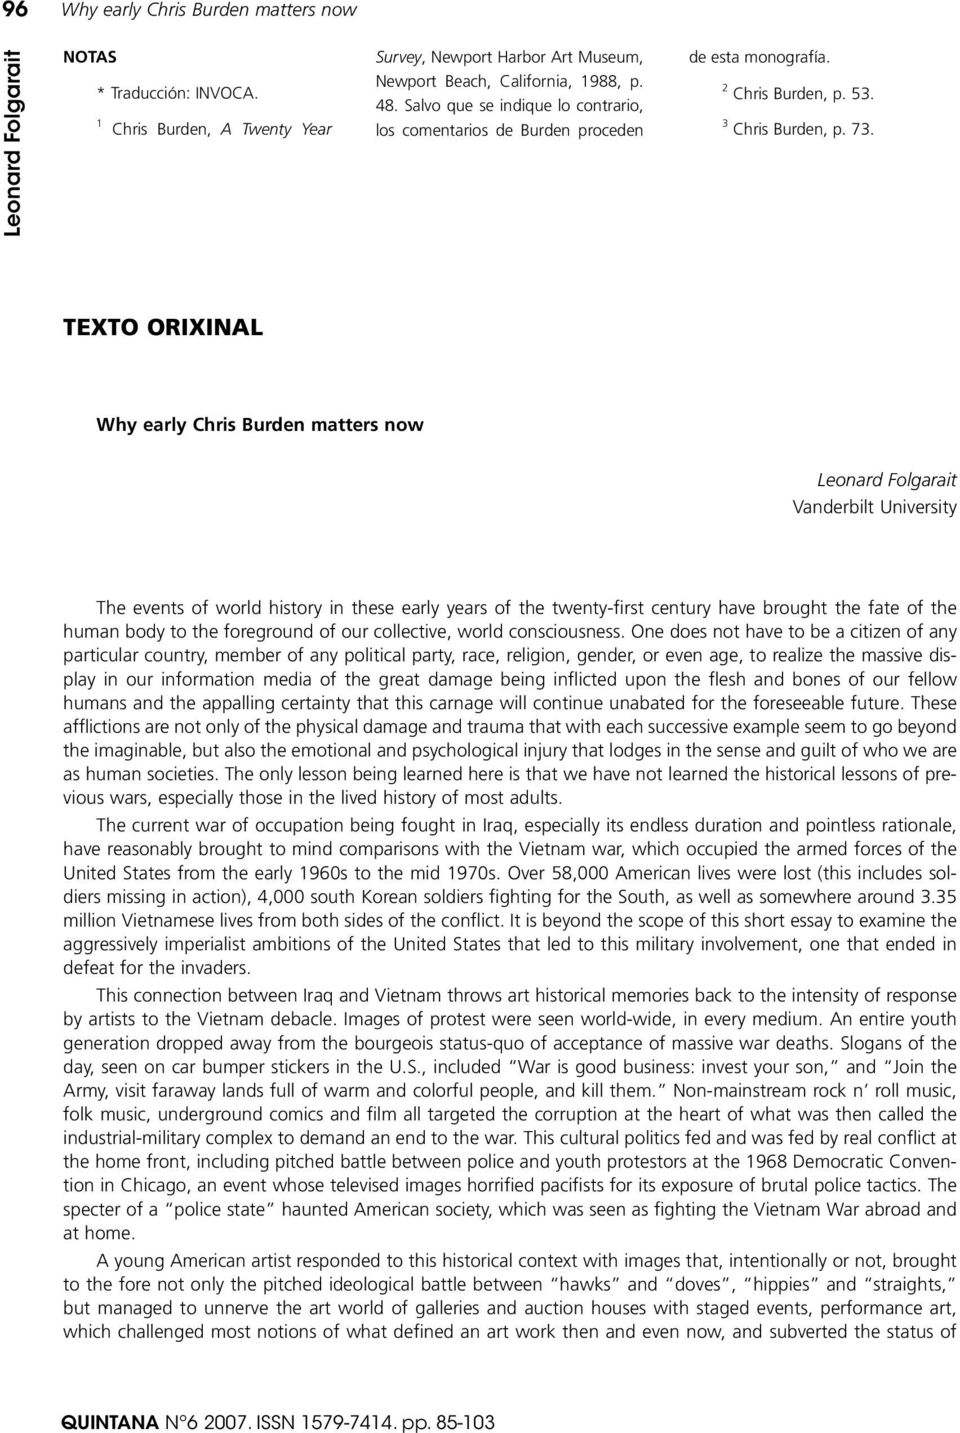 TEXTO ORIXINAL Why early Chris Burden matters now Vanderbilt University The events of world history in these early years of the twenty-first century have brought the fate of the human body to the